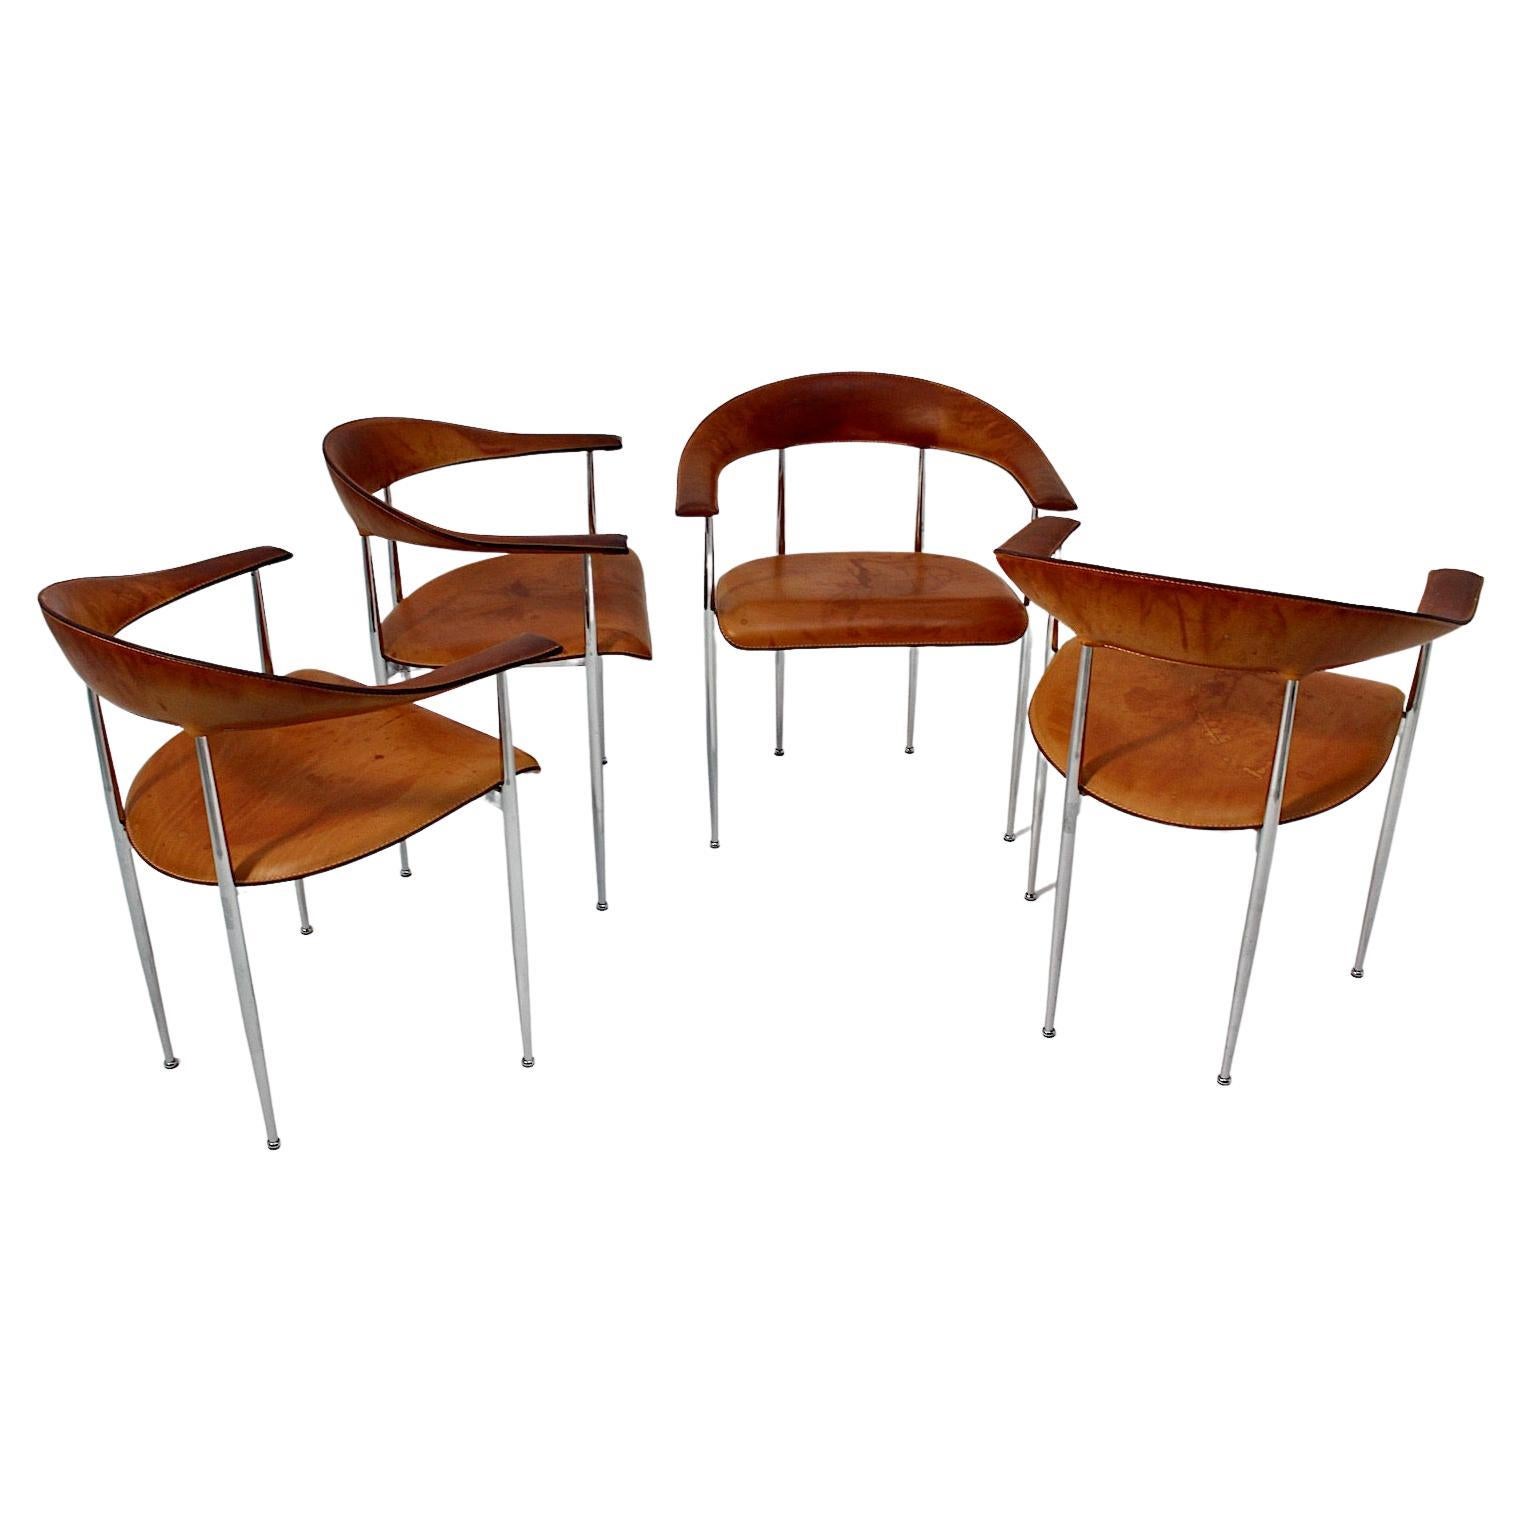 Modernist Vintage Four Dining Chairs Cognac Brown Leather Chrome, 1980s, Italy